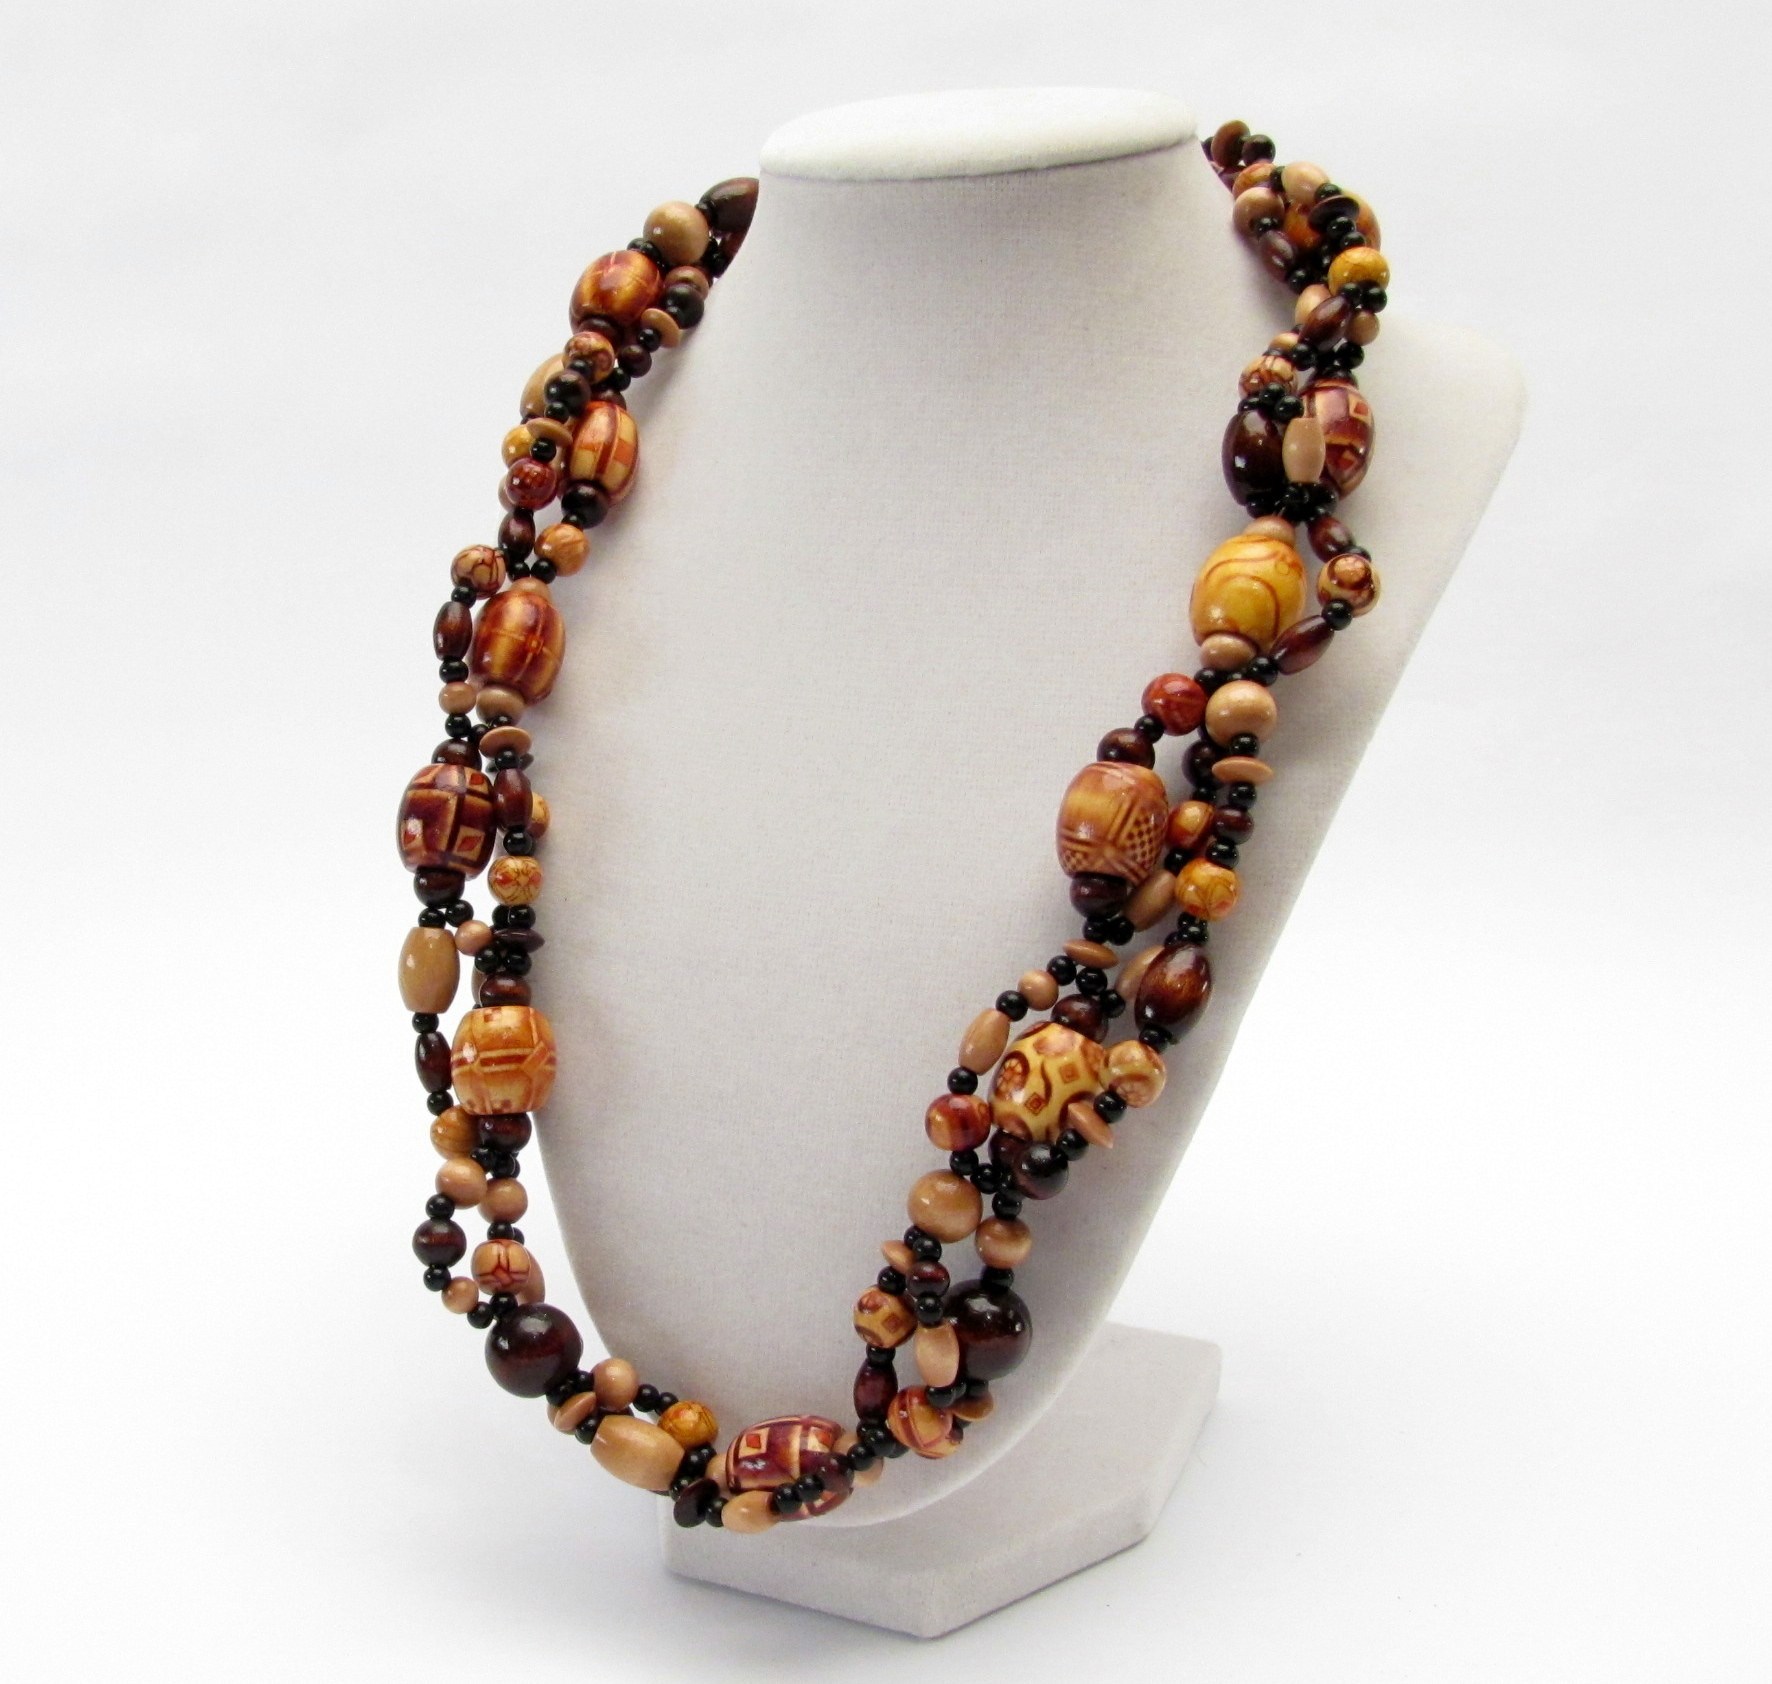 Wooden Bead Necklace
 Multi Strand Wood Bead Necklace